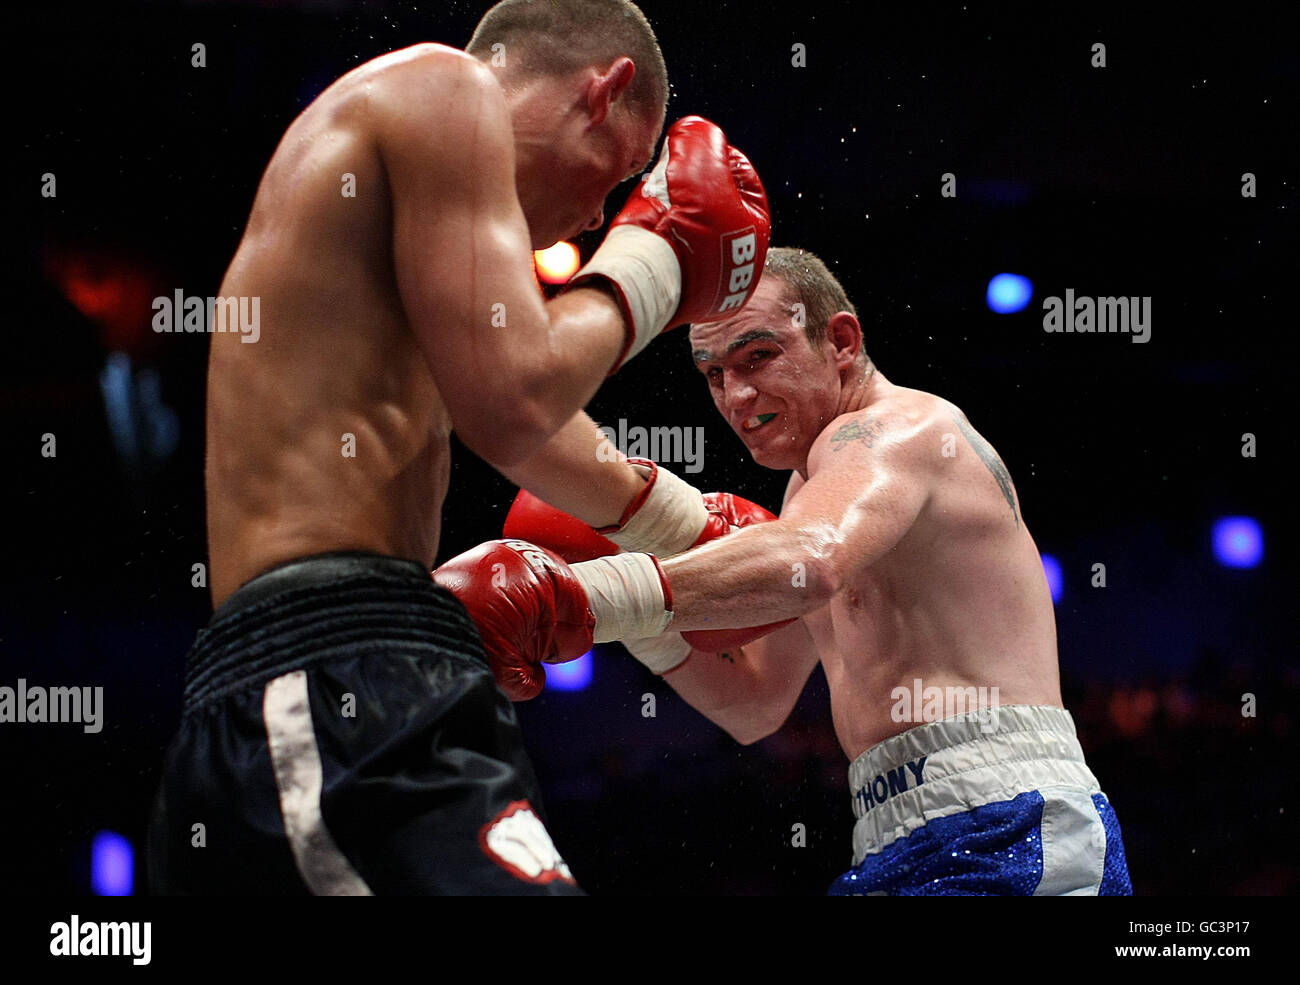 Anthony Fitzgerald on his way to victory over Tadus Jonkus in their Middleweight fight at the O2 Arena, Dublin. Stock Photo